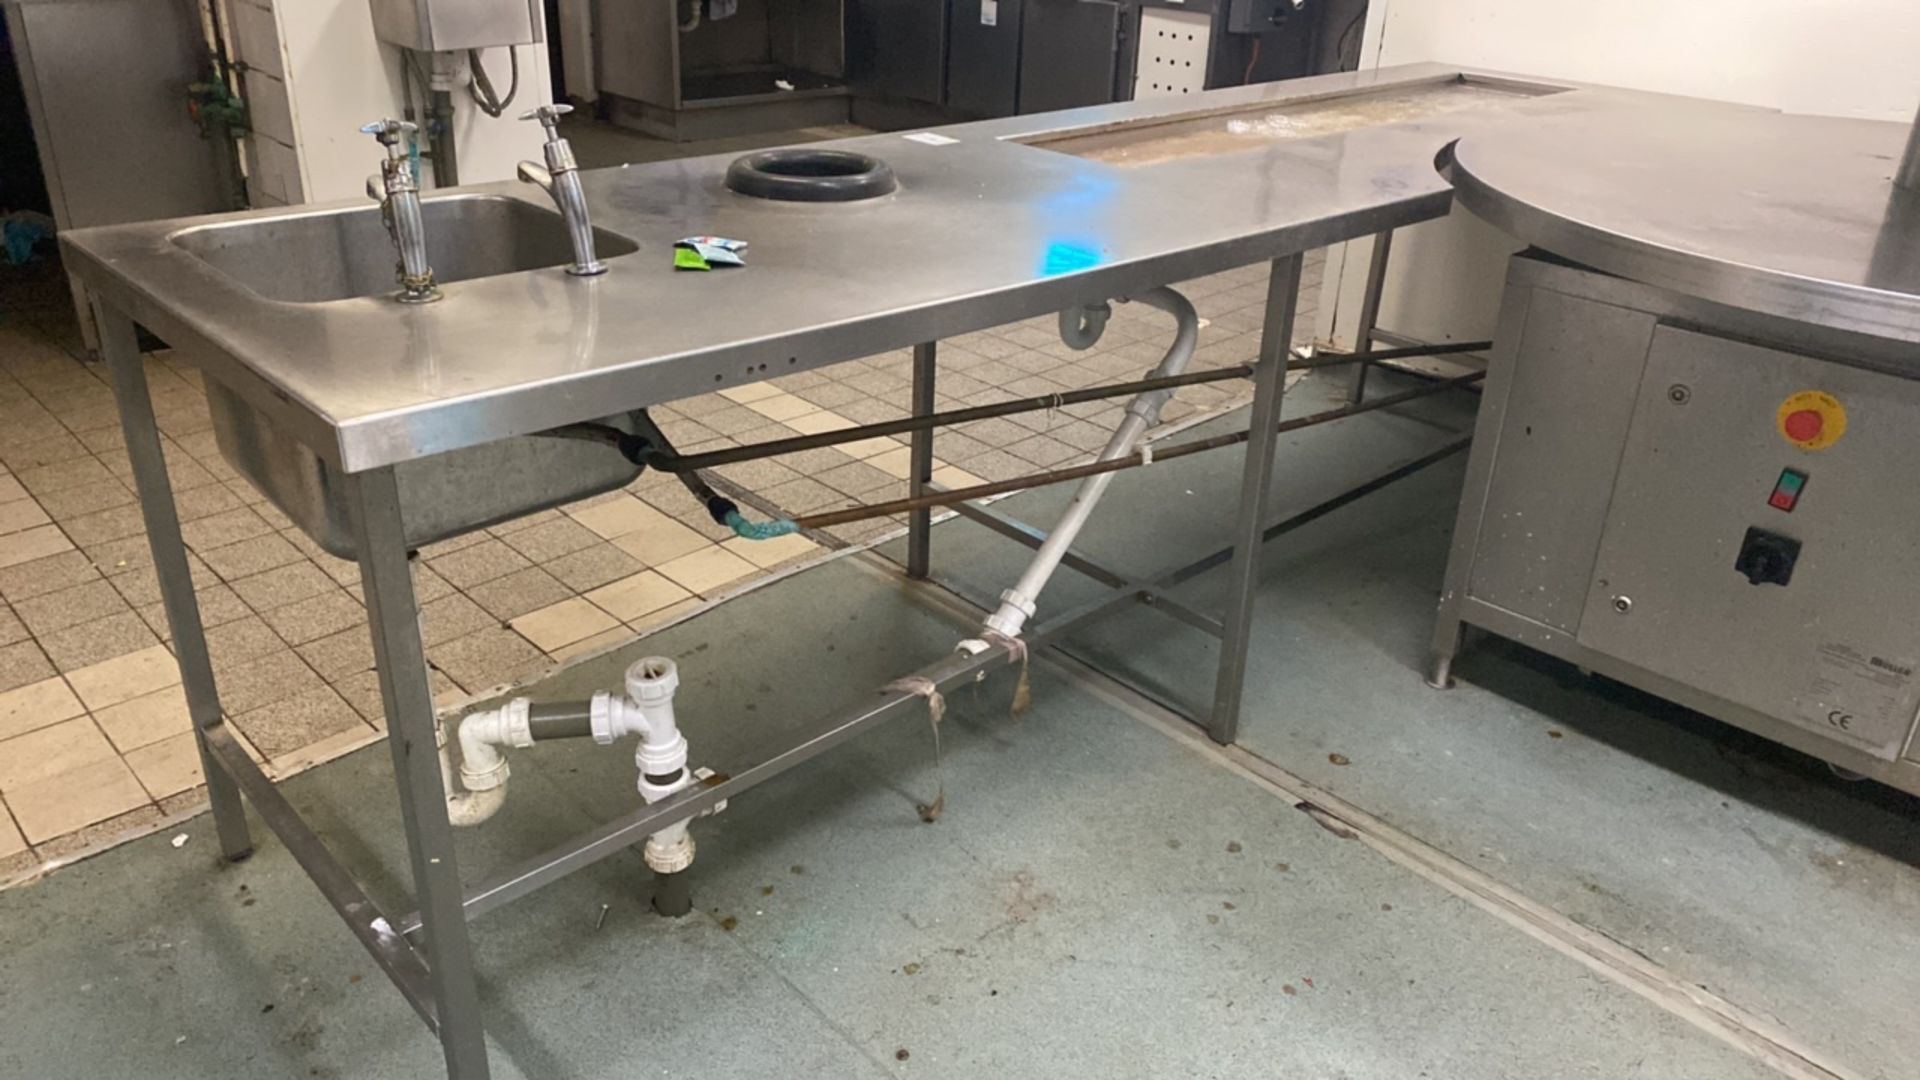 Stainless Steel Preparation Unit With Sink - Image 3 of 3